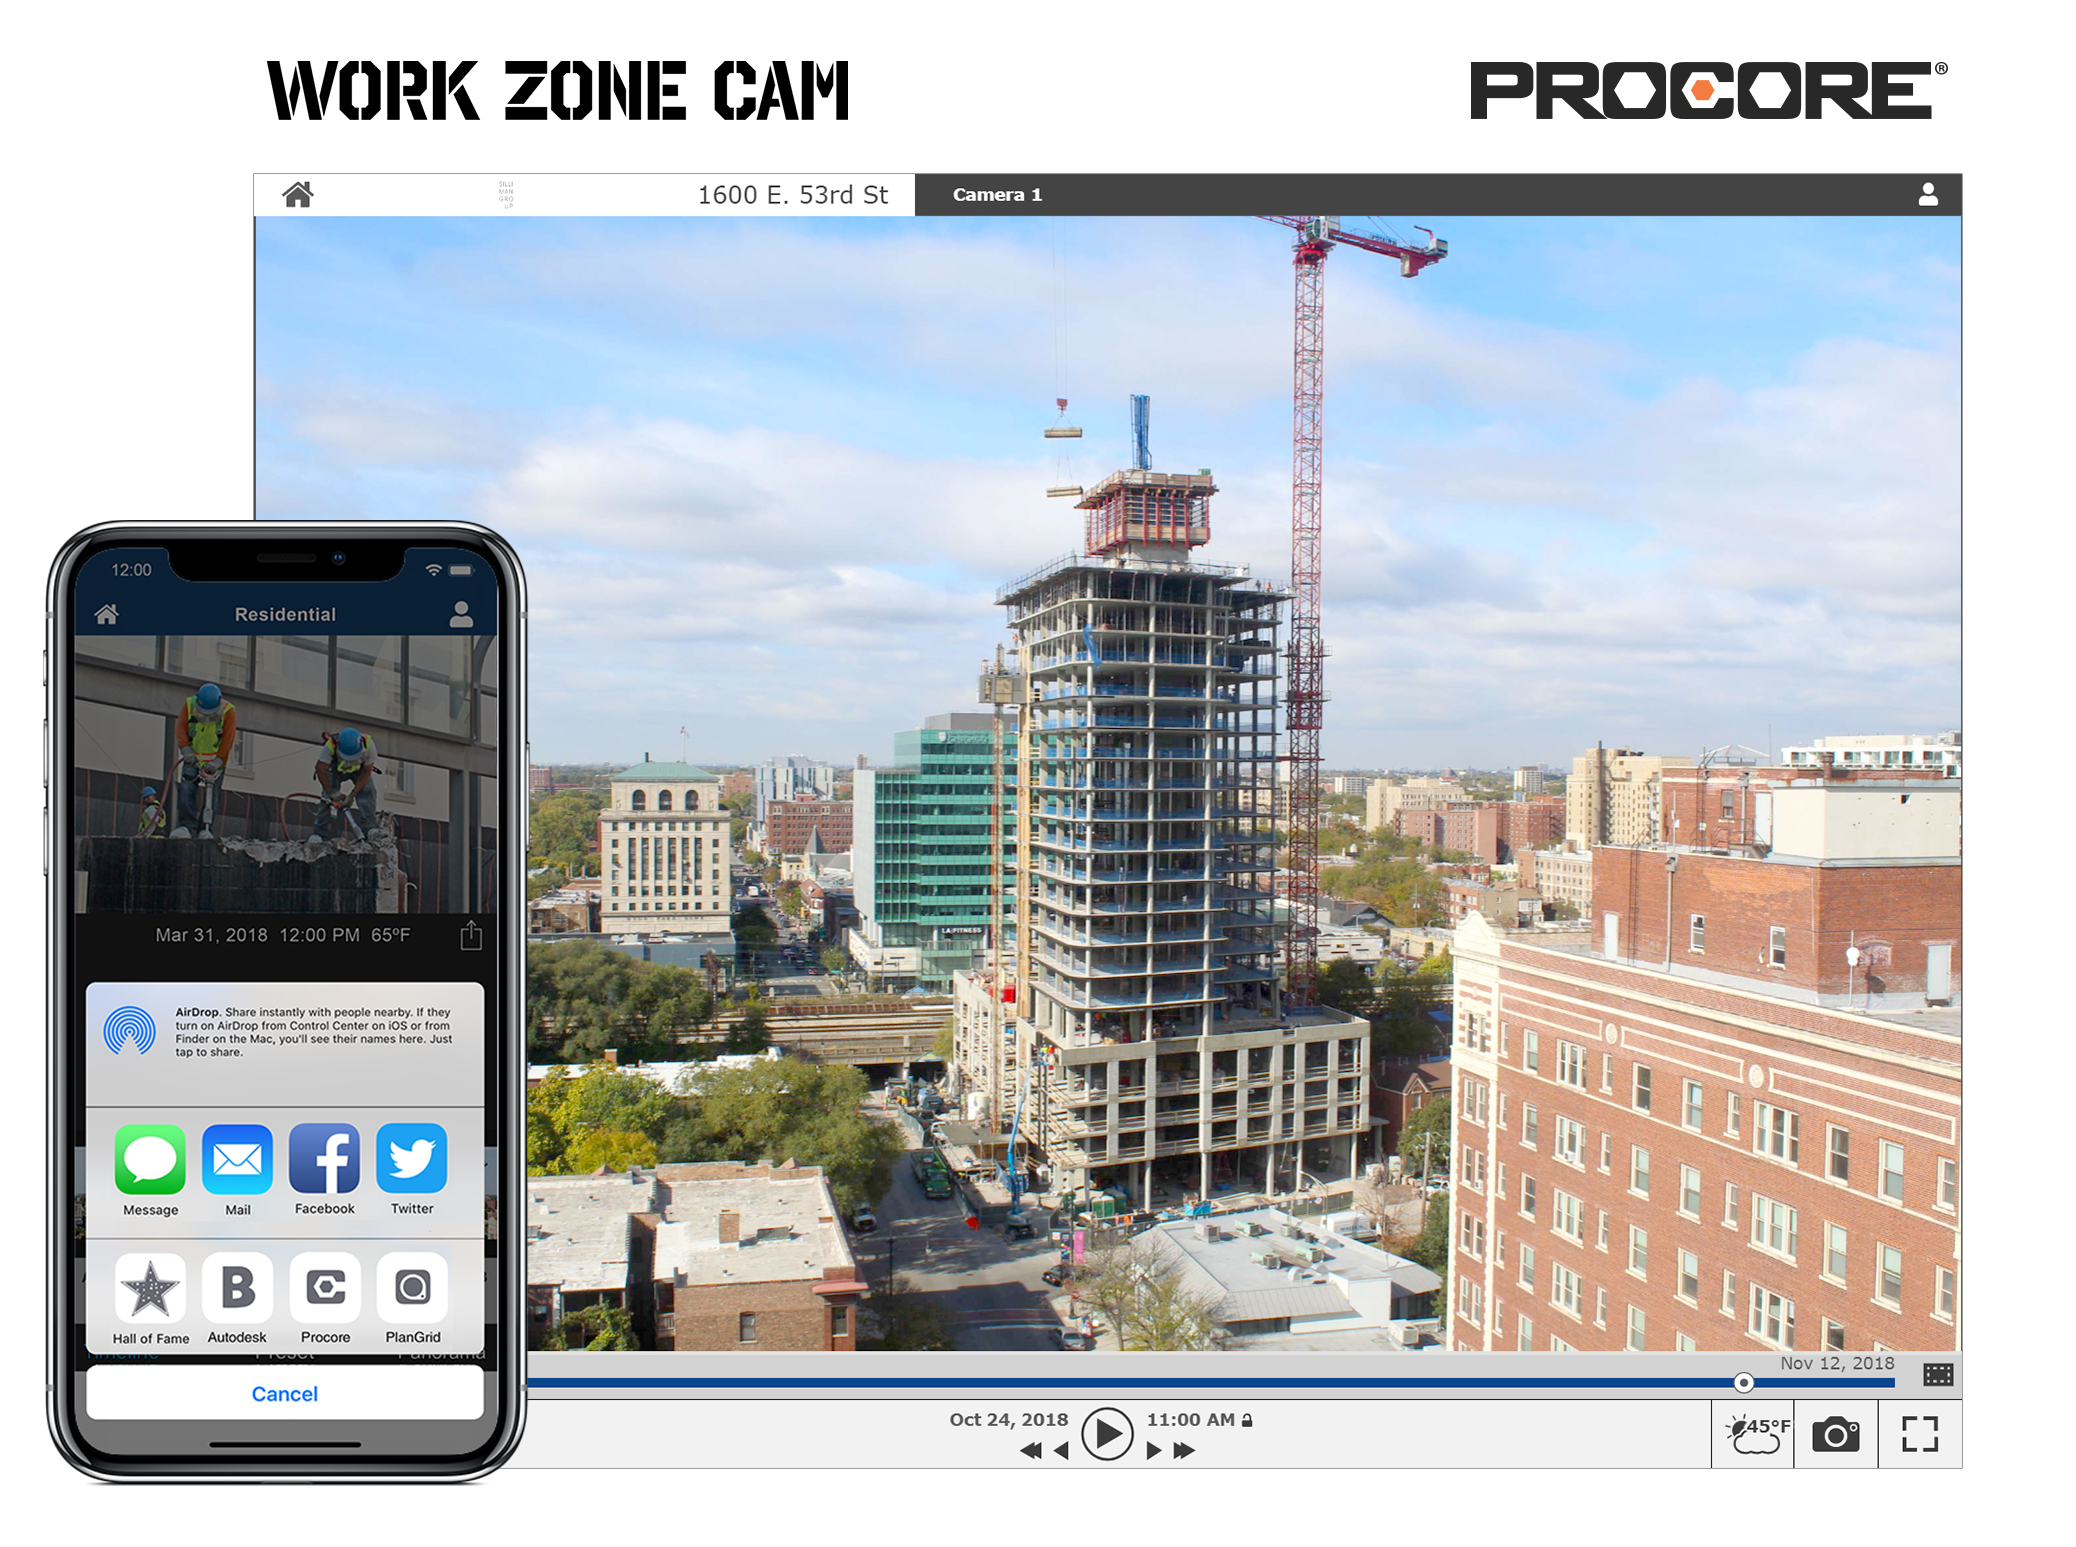 Users have the ability to access their Procore contact list and share important Work Zone Cam progress images directly with them.